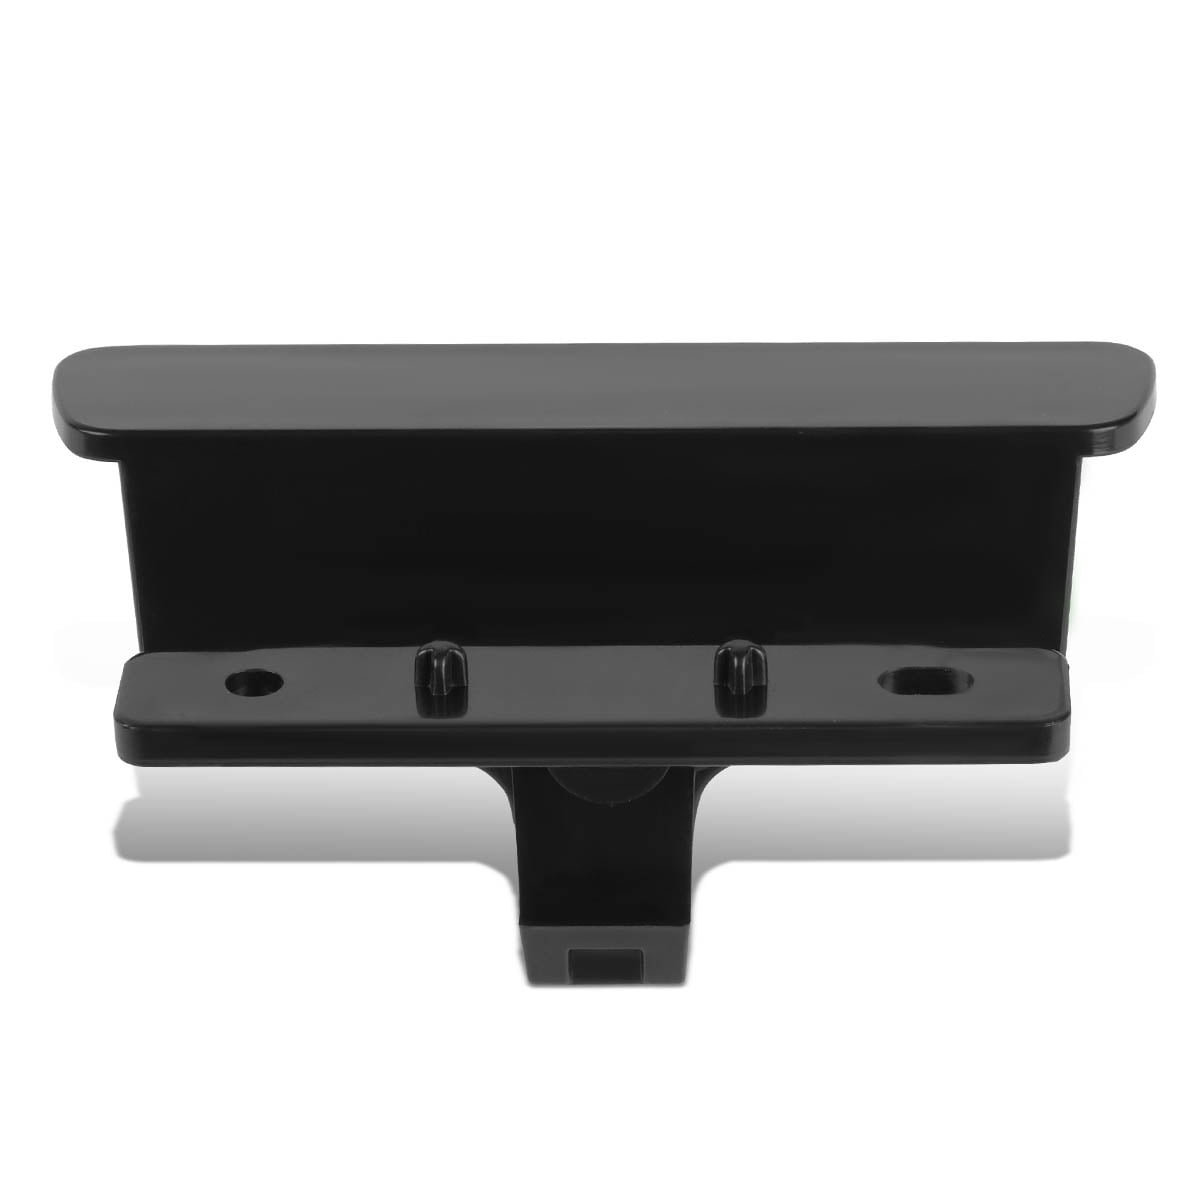 DEF Center Console Armrest Lid Latch for 2007-2014 Chevy Silverado,Avalanche,Suburban,Tahoe,GMC,Sierra,Yukon,Escalade Replaces Part 20864151,20864153,20864154 Pack of 1 